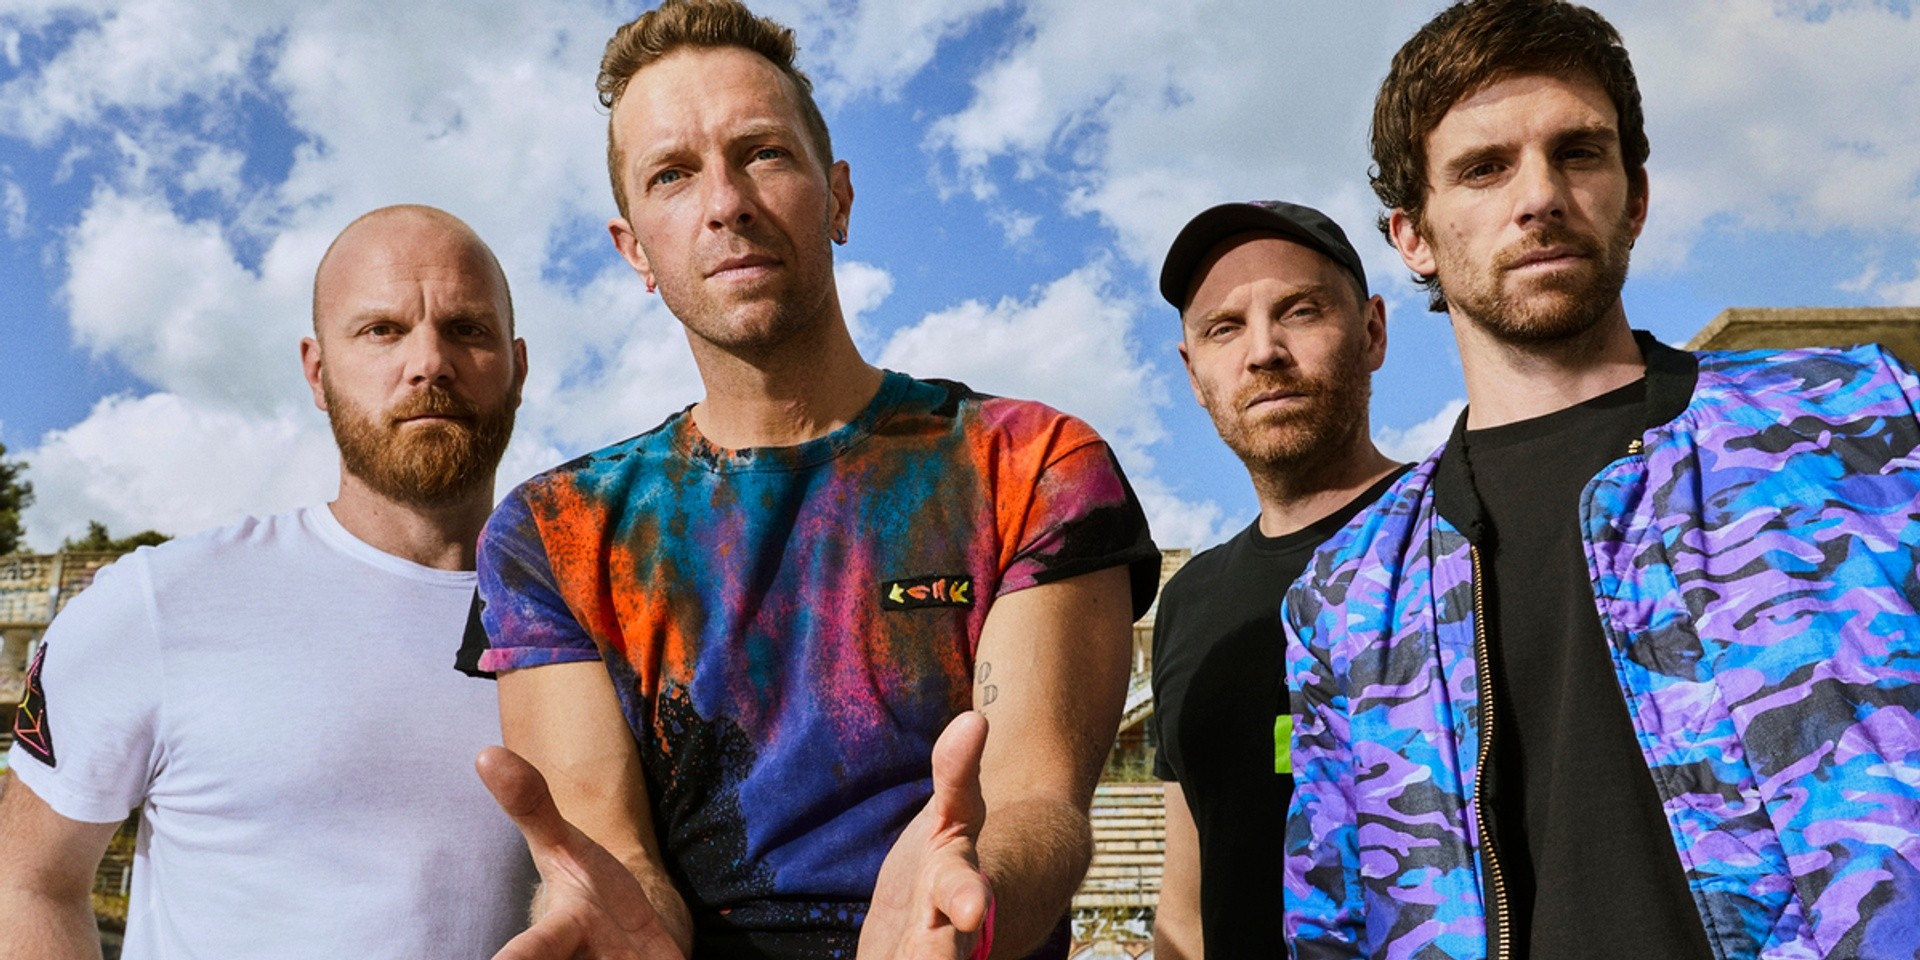 Coldplay add new dates to 2023 'Music Of The Spheres' world tour – concerts in Tokyo, Kaohsiung, Jakarta, Perth, Kuala Lumpur confirmed